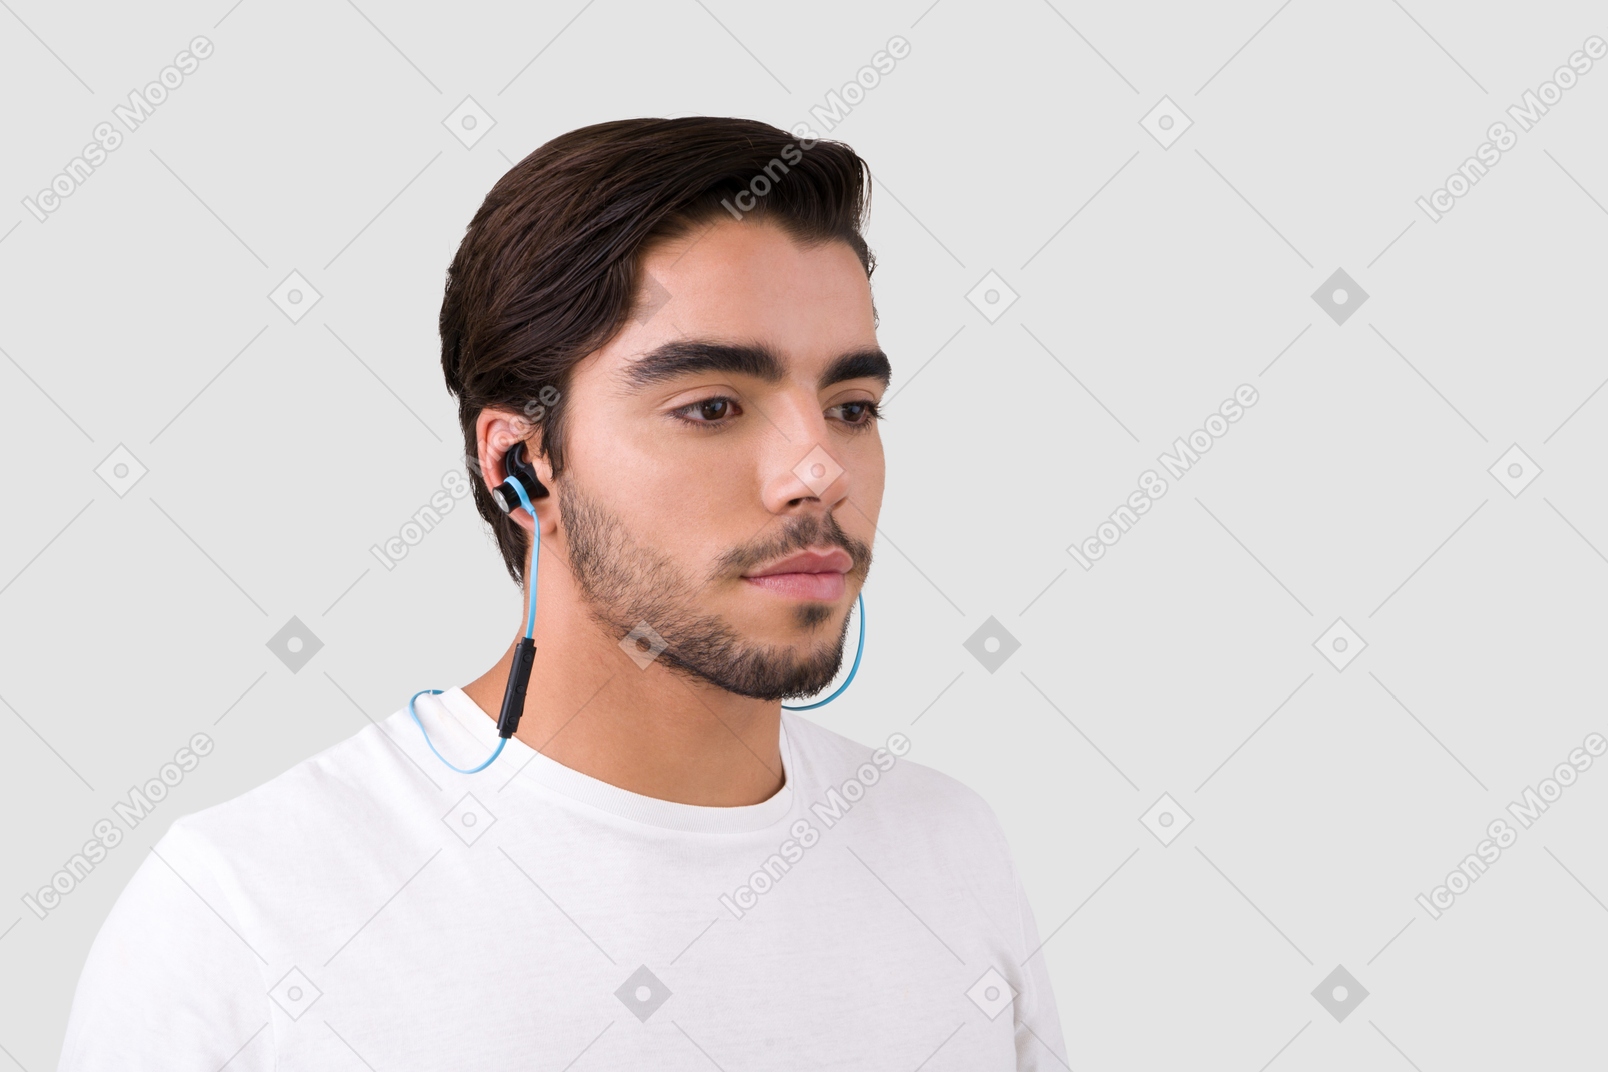 A man wearing a headset and a white t - shirt